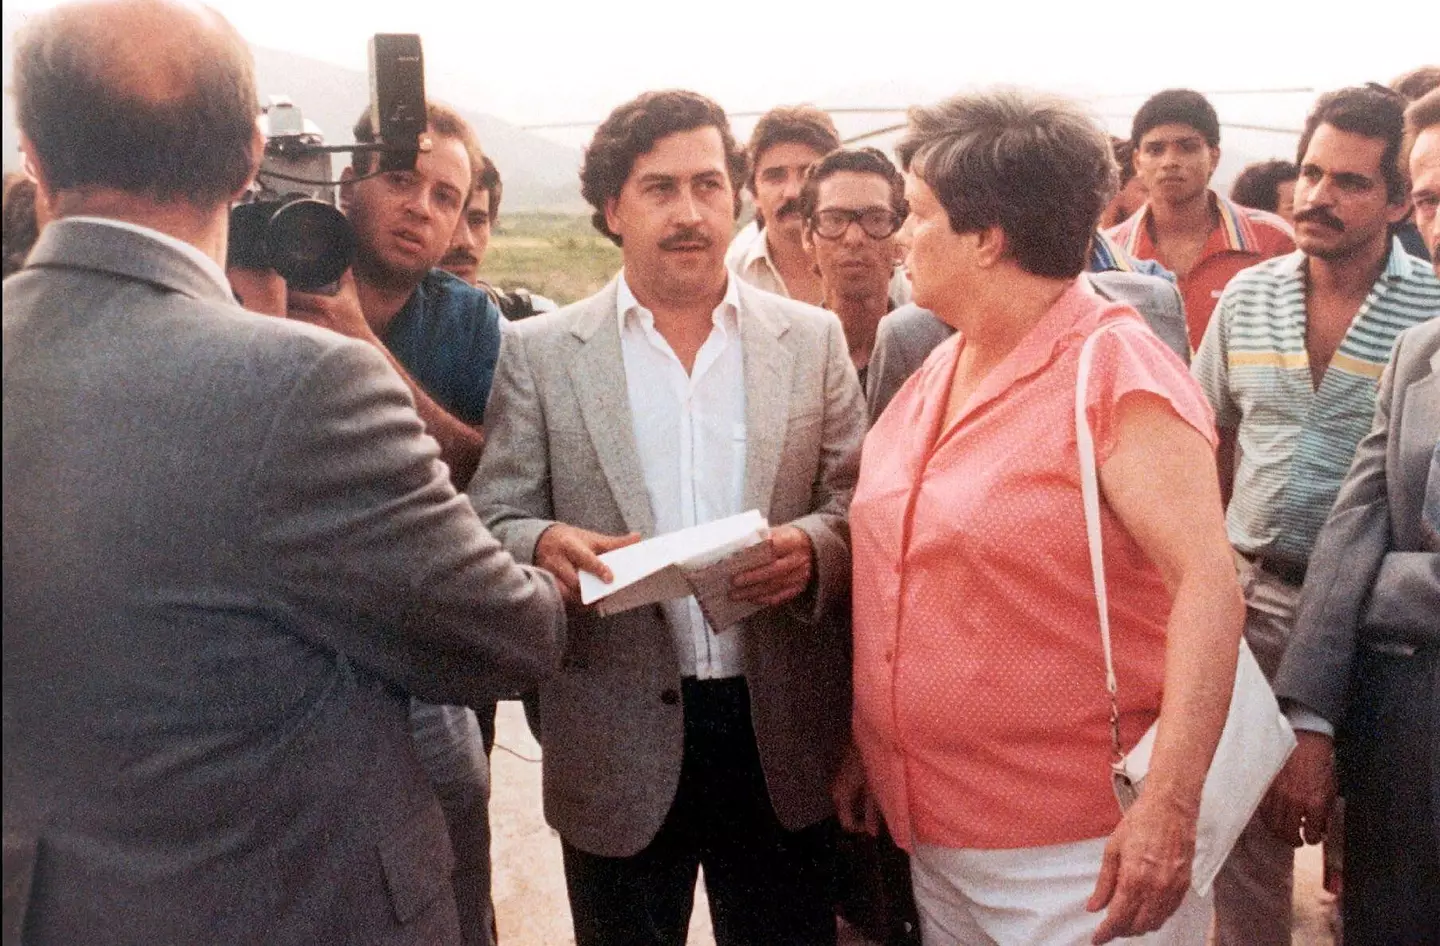 The pair were tasked with taking down Pablo Escobar, pictured.